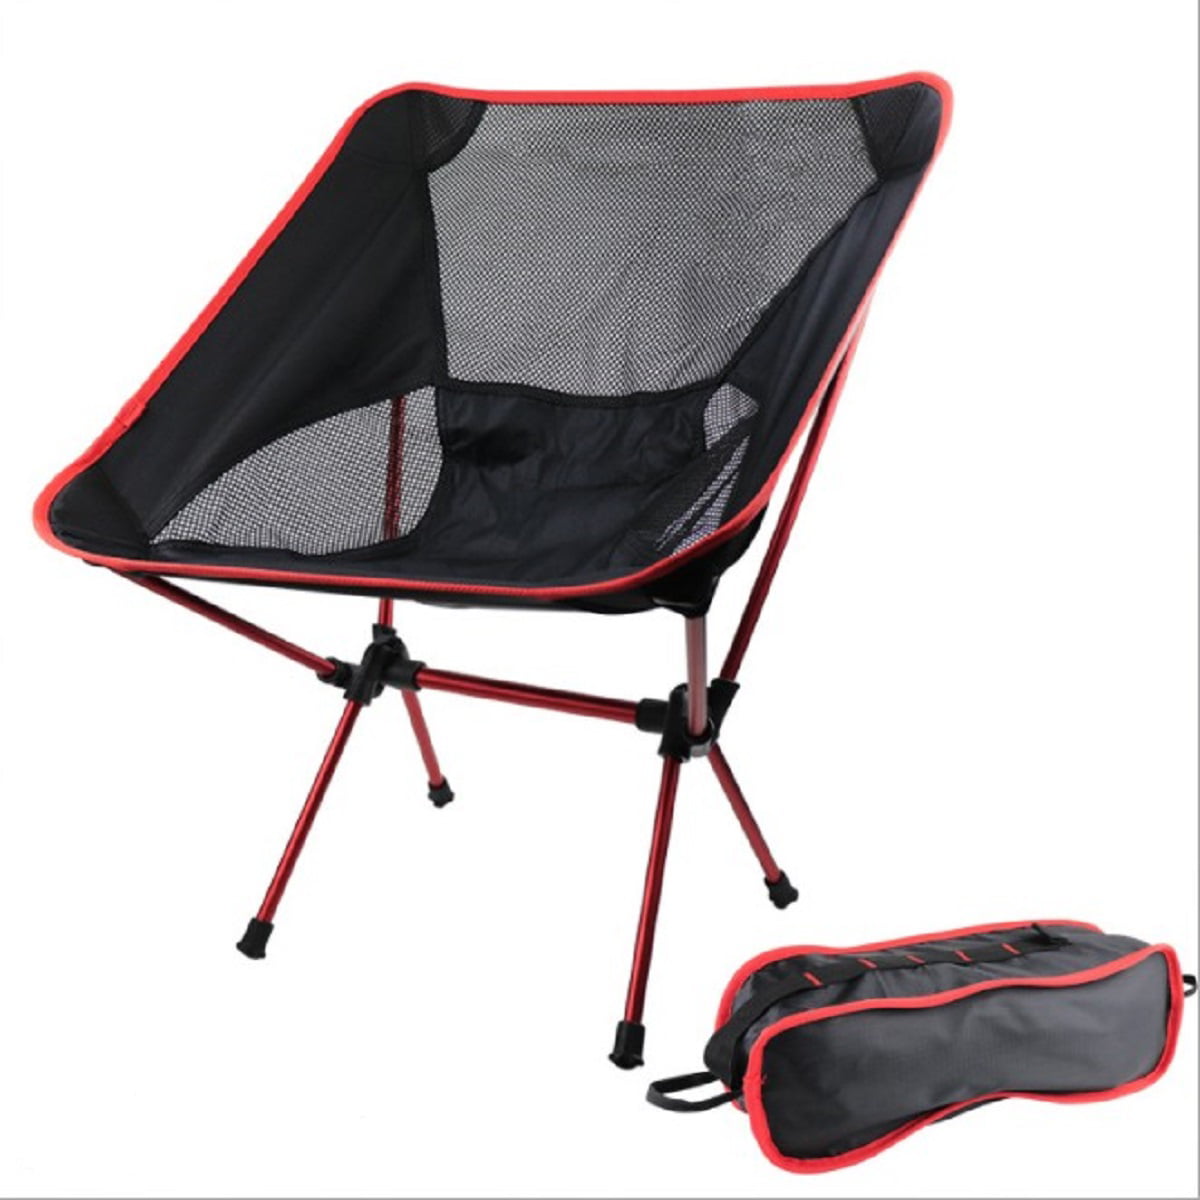 Portable Folding Camping Chair Outdoor Travel Picnic Beach Fishing w/ Carry Bag 